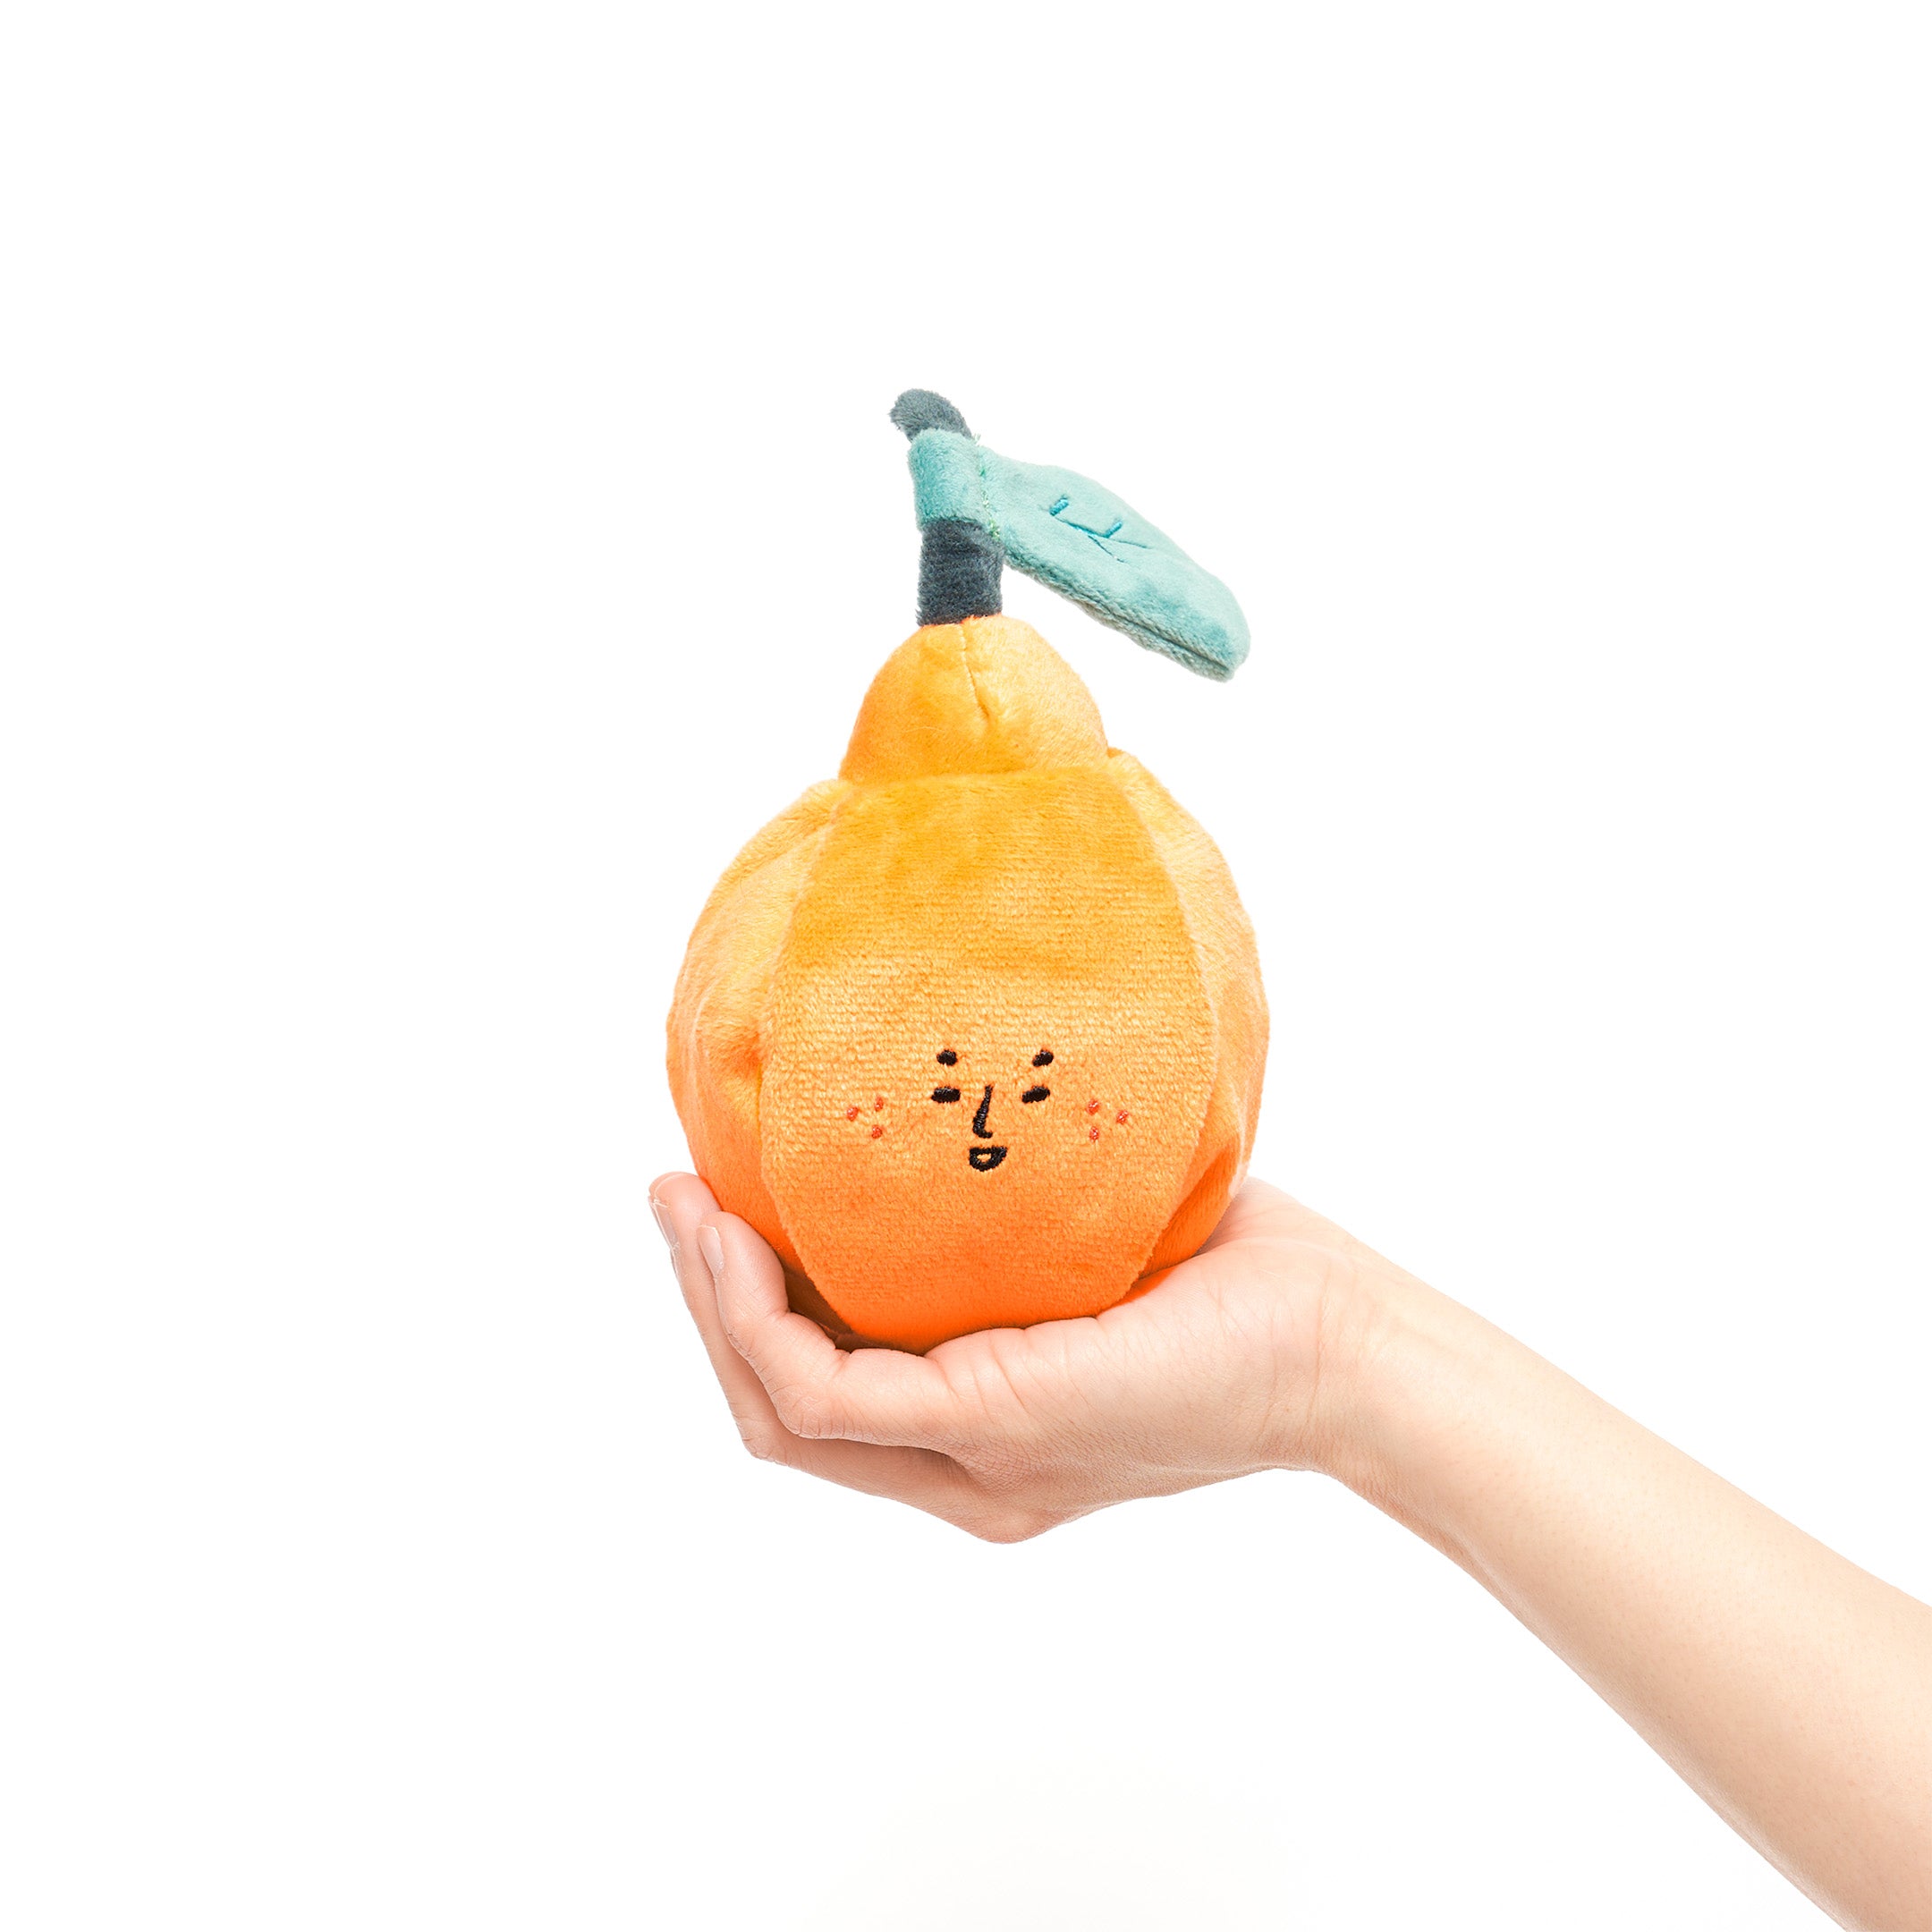 A person's hand holding a cheerful orange-shaped dog toy with a teal stem on a white background.